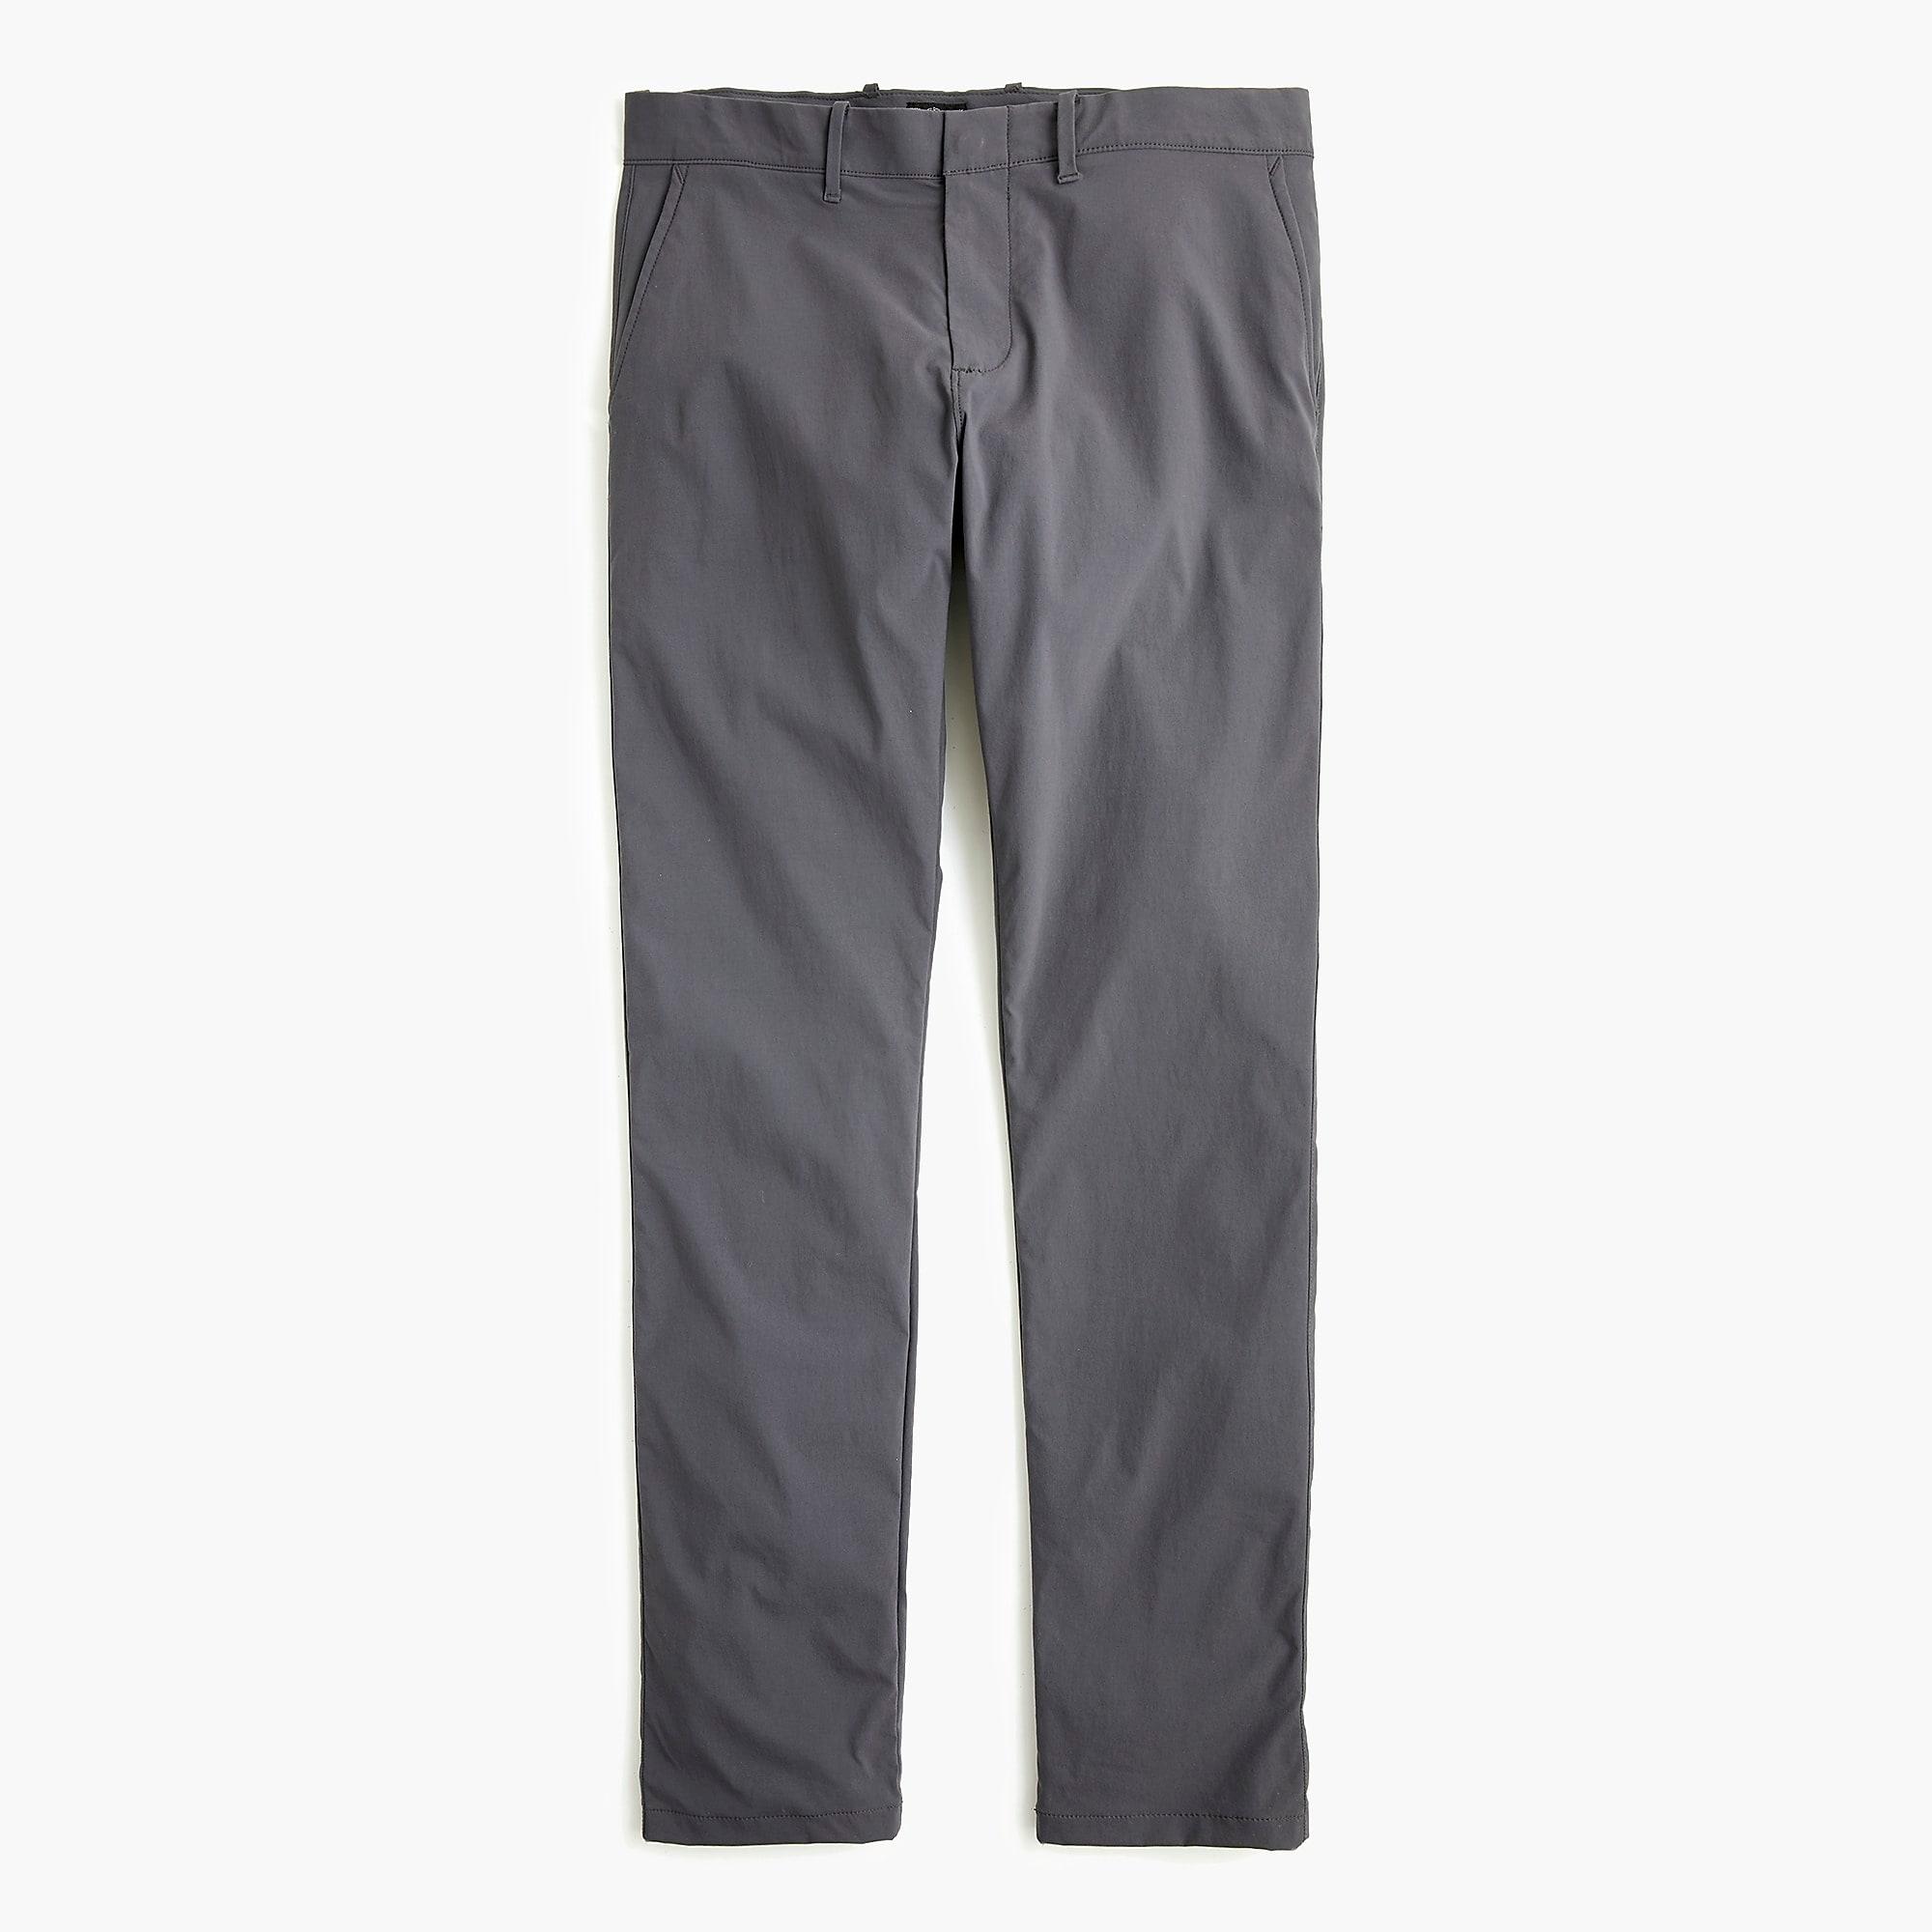 J.Crew Synthetic 484 Slim-fit Tech Pant in Gray for Men - Lyst